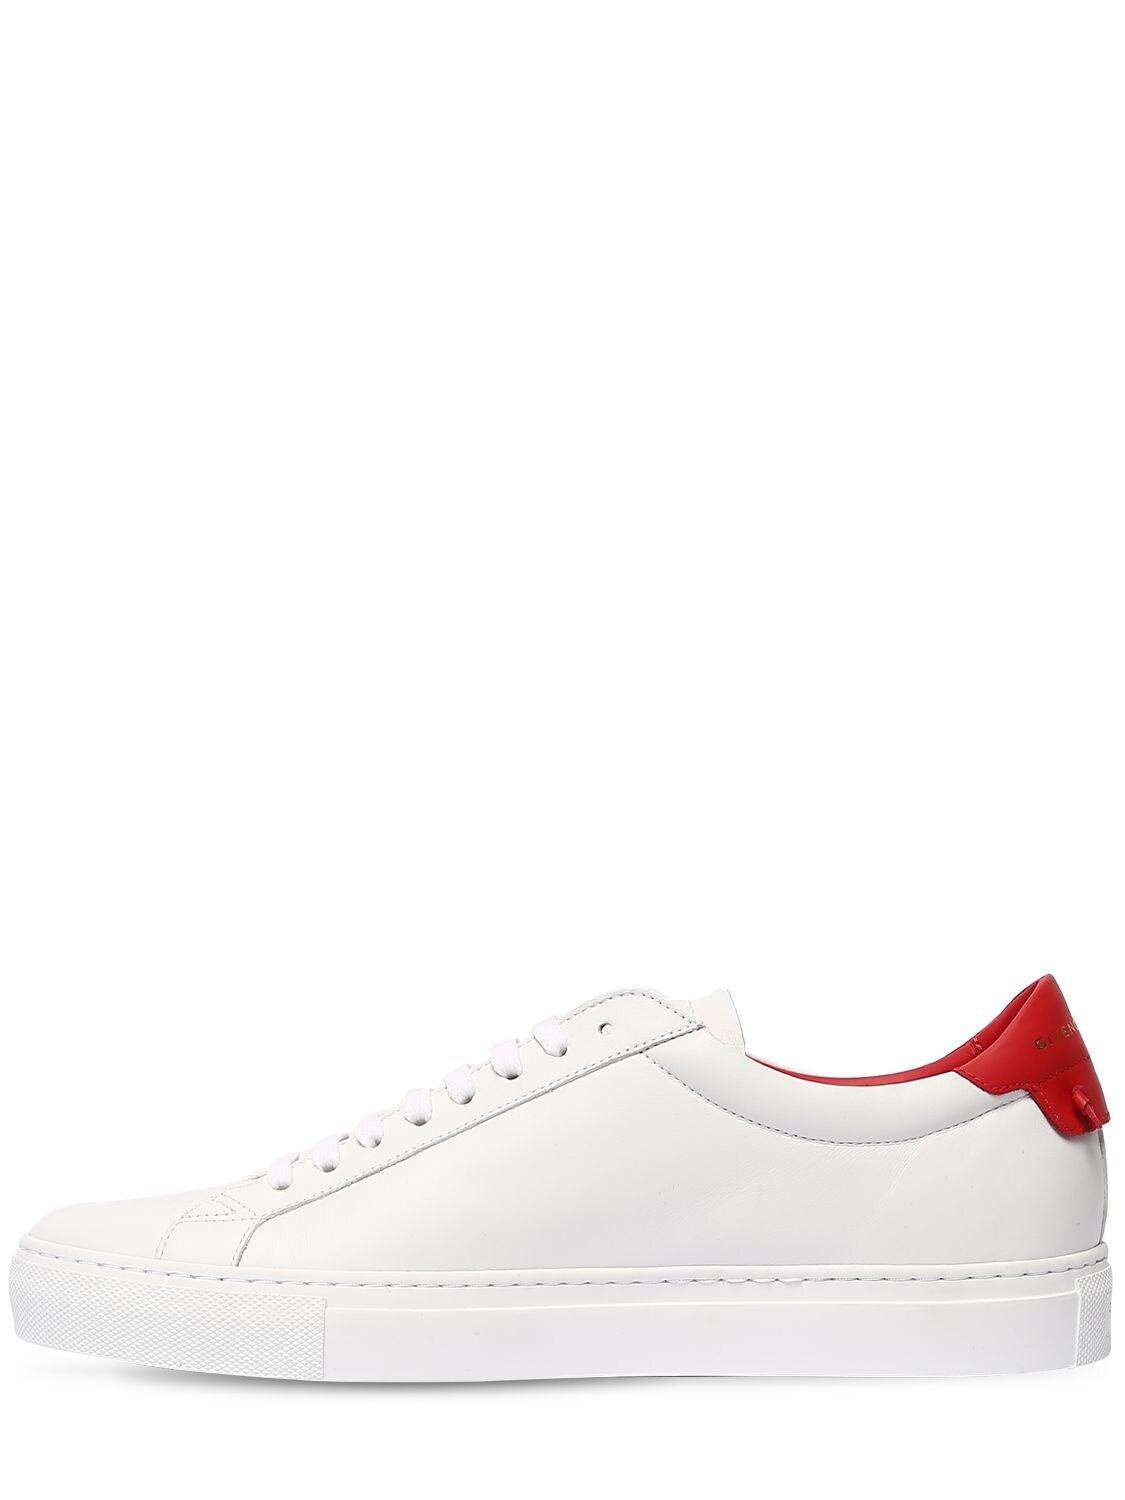 Givenchy Urban Street Leather Sneakers in Red (White) for Men - Lyst